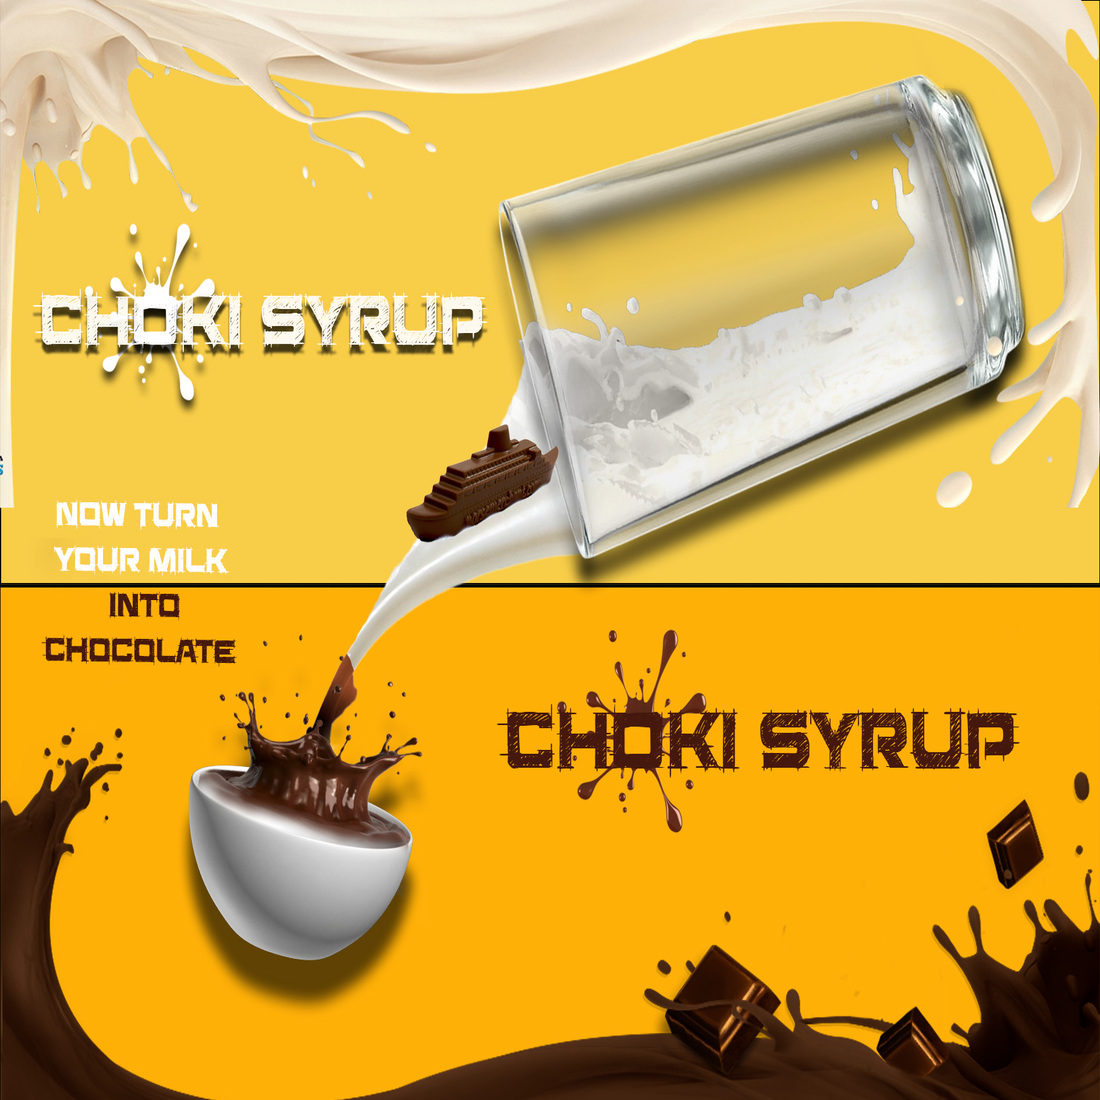 Choki syrup Pamplet preview image.